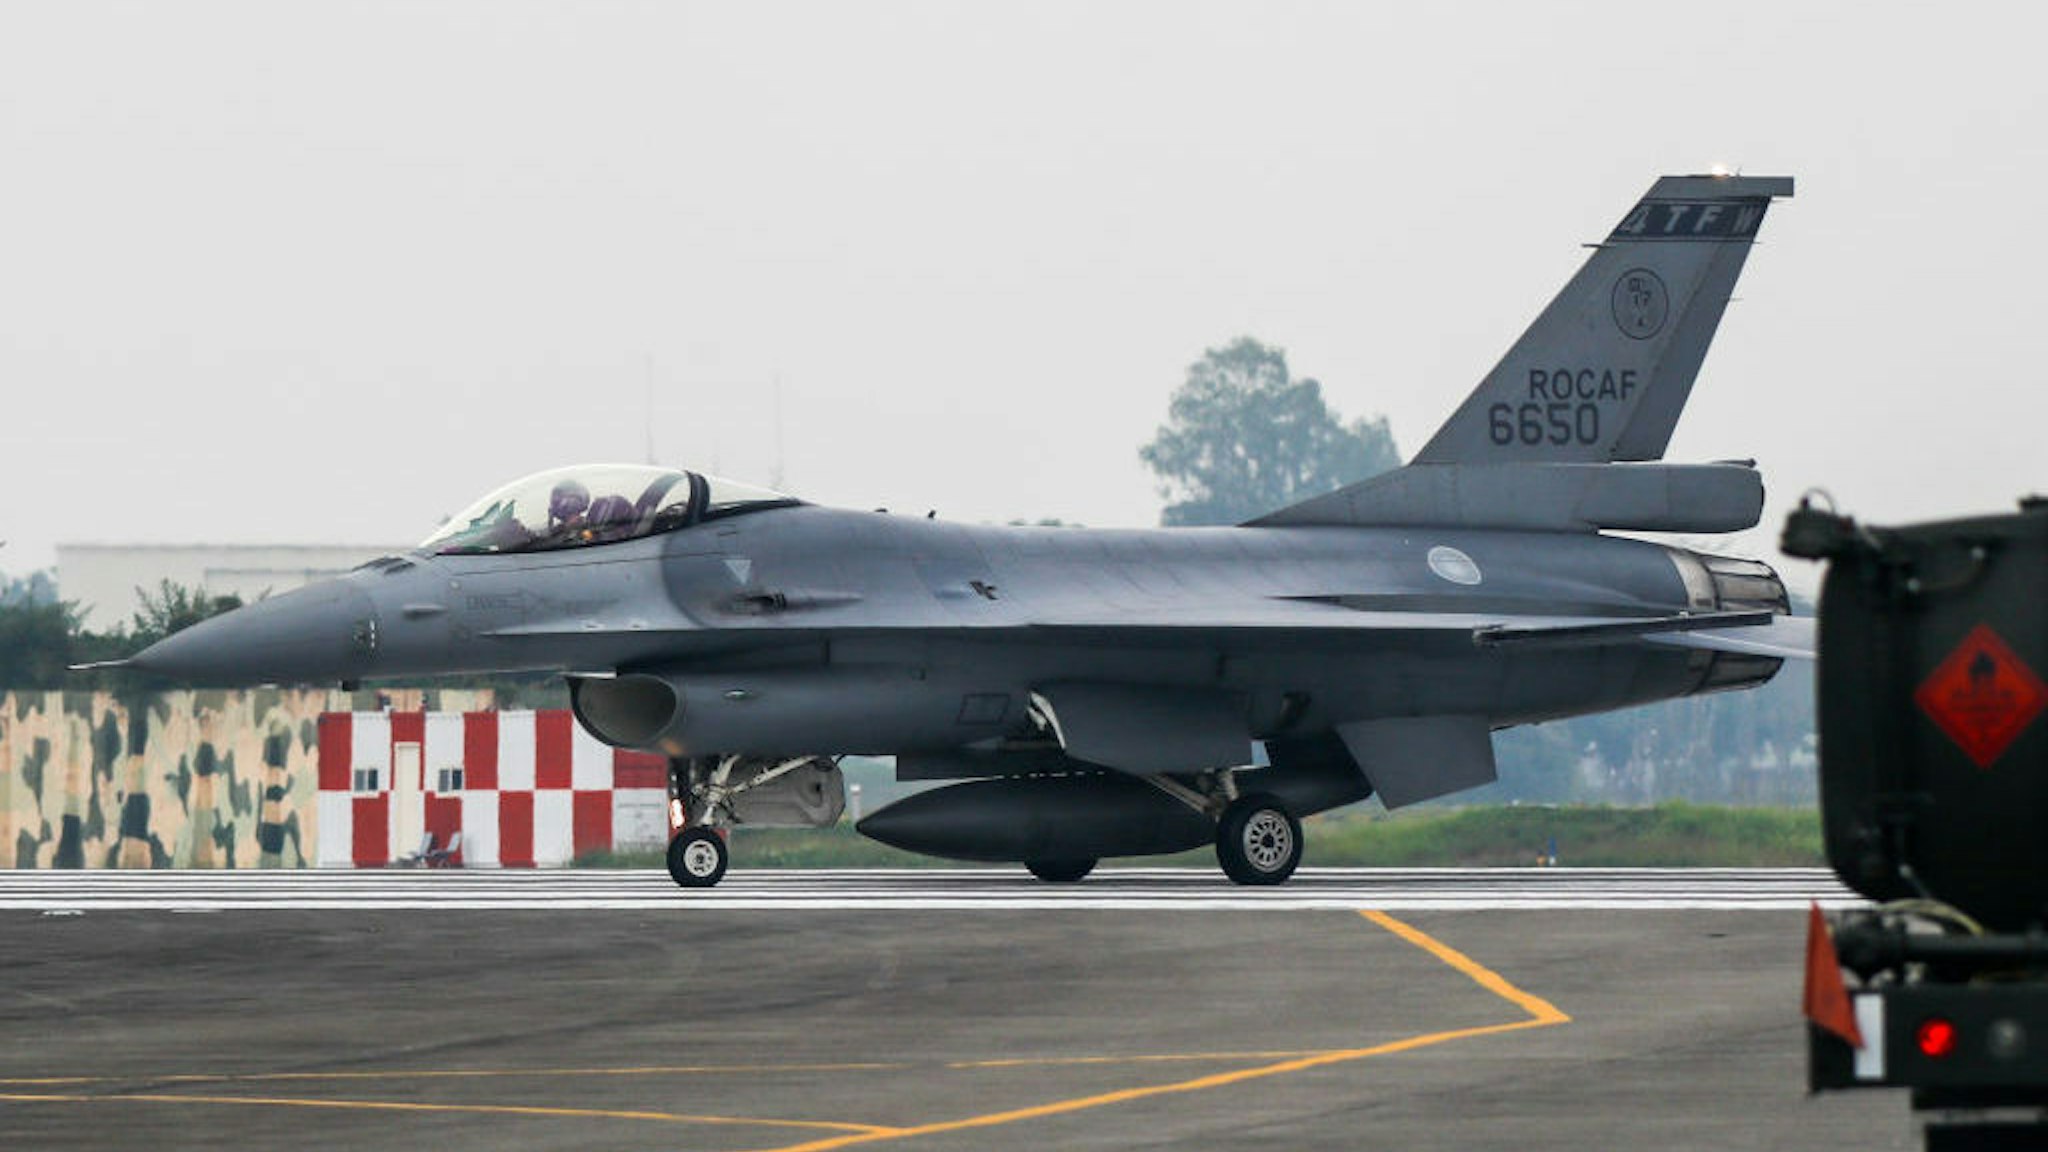 An archive photo taken during an Air Force drill on Jan 5, 2022 shows the taxing of an F-16V jet-fighter with with the serial number 6650, which has been reported missing over the sea off western Taiwan on 11 January local time, as it was deployed to a routine training, in Chiayi, Taiwan, 11 Jan, 2022. According to Taiwan’s Air Force, search and recovery operations have been underway, with residents saying that they witnessed the crashing of the warplane F-16V into the sea near Chiayi. (Photo by Ceng Shou Yi/NurPhoto)